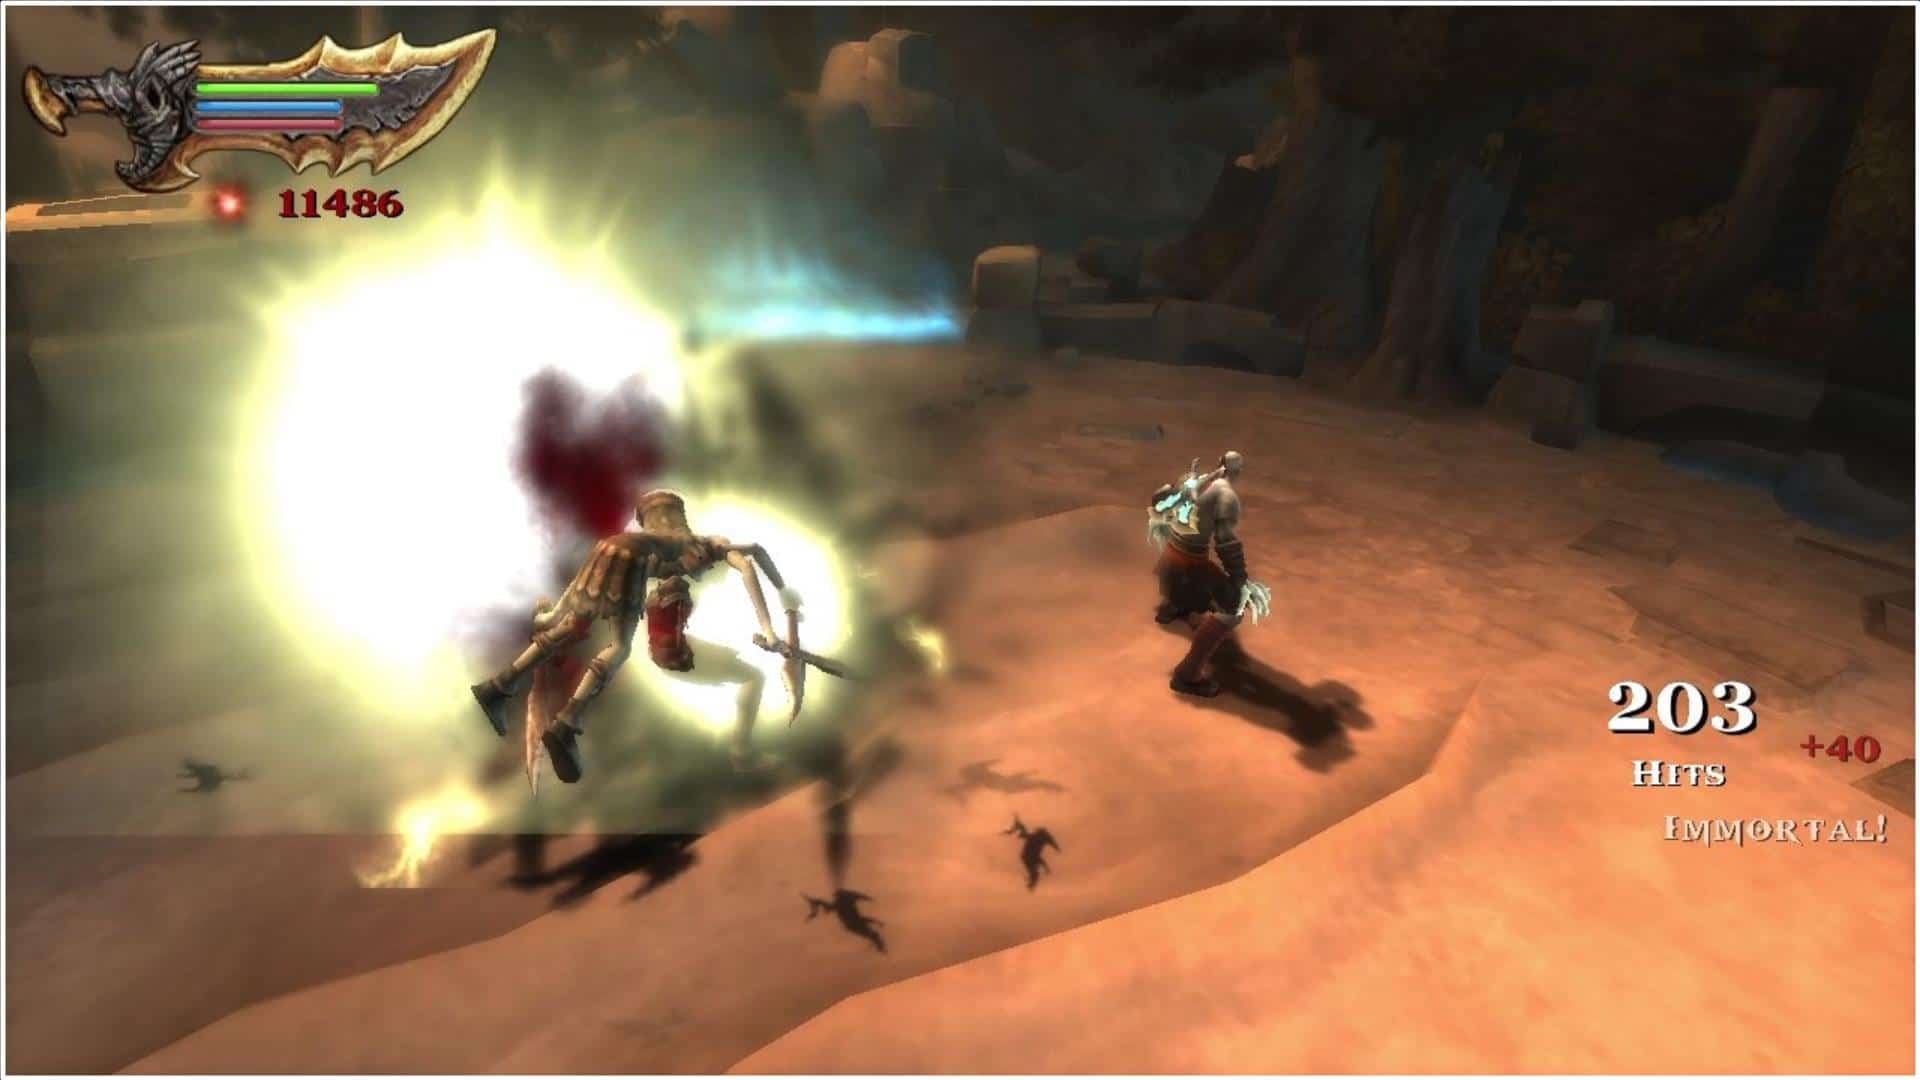 God of War: Ghost of Sparta: PPSSPP ISO English Download